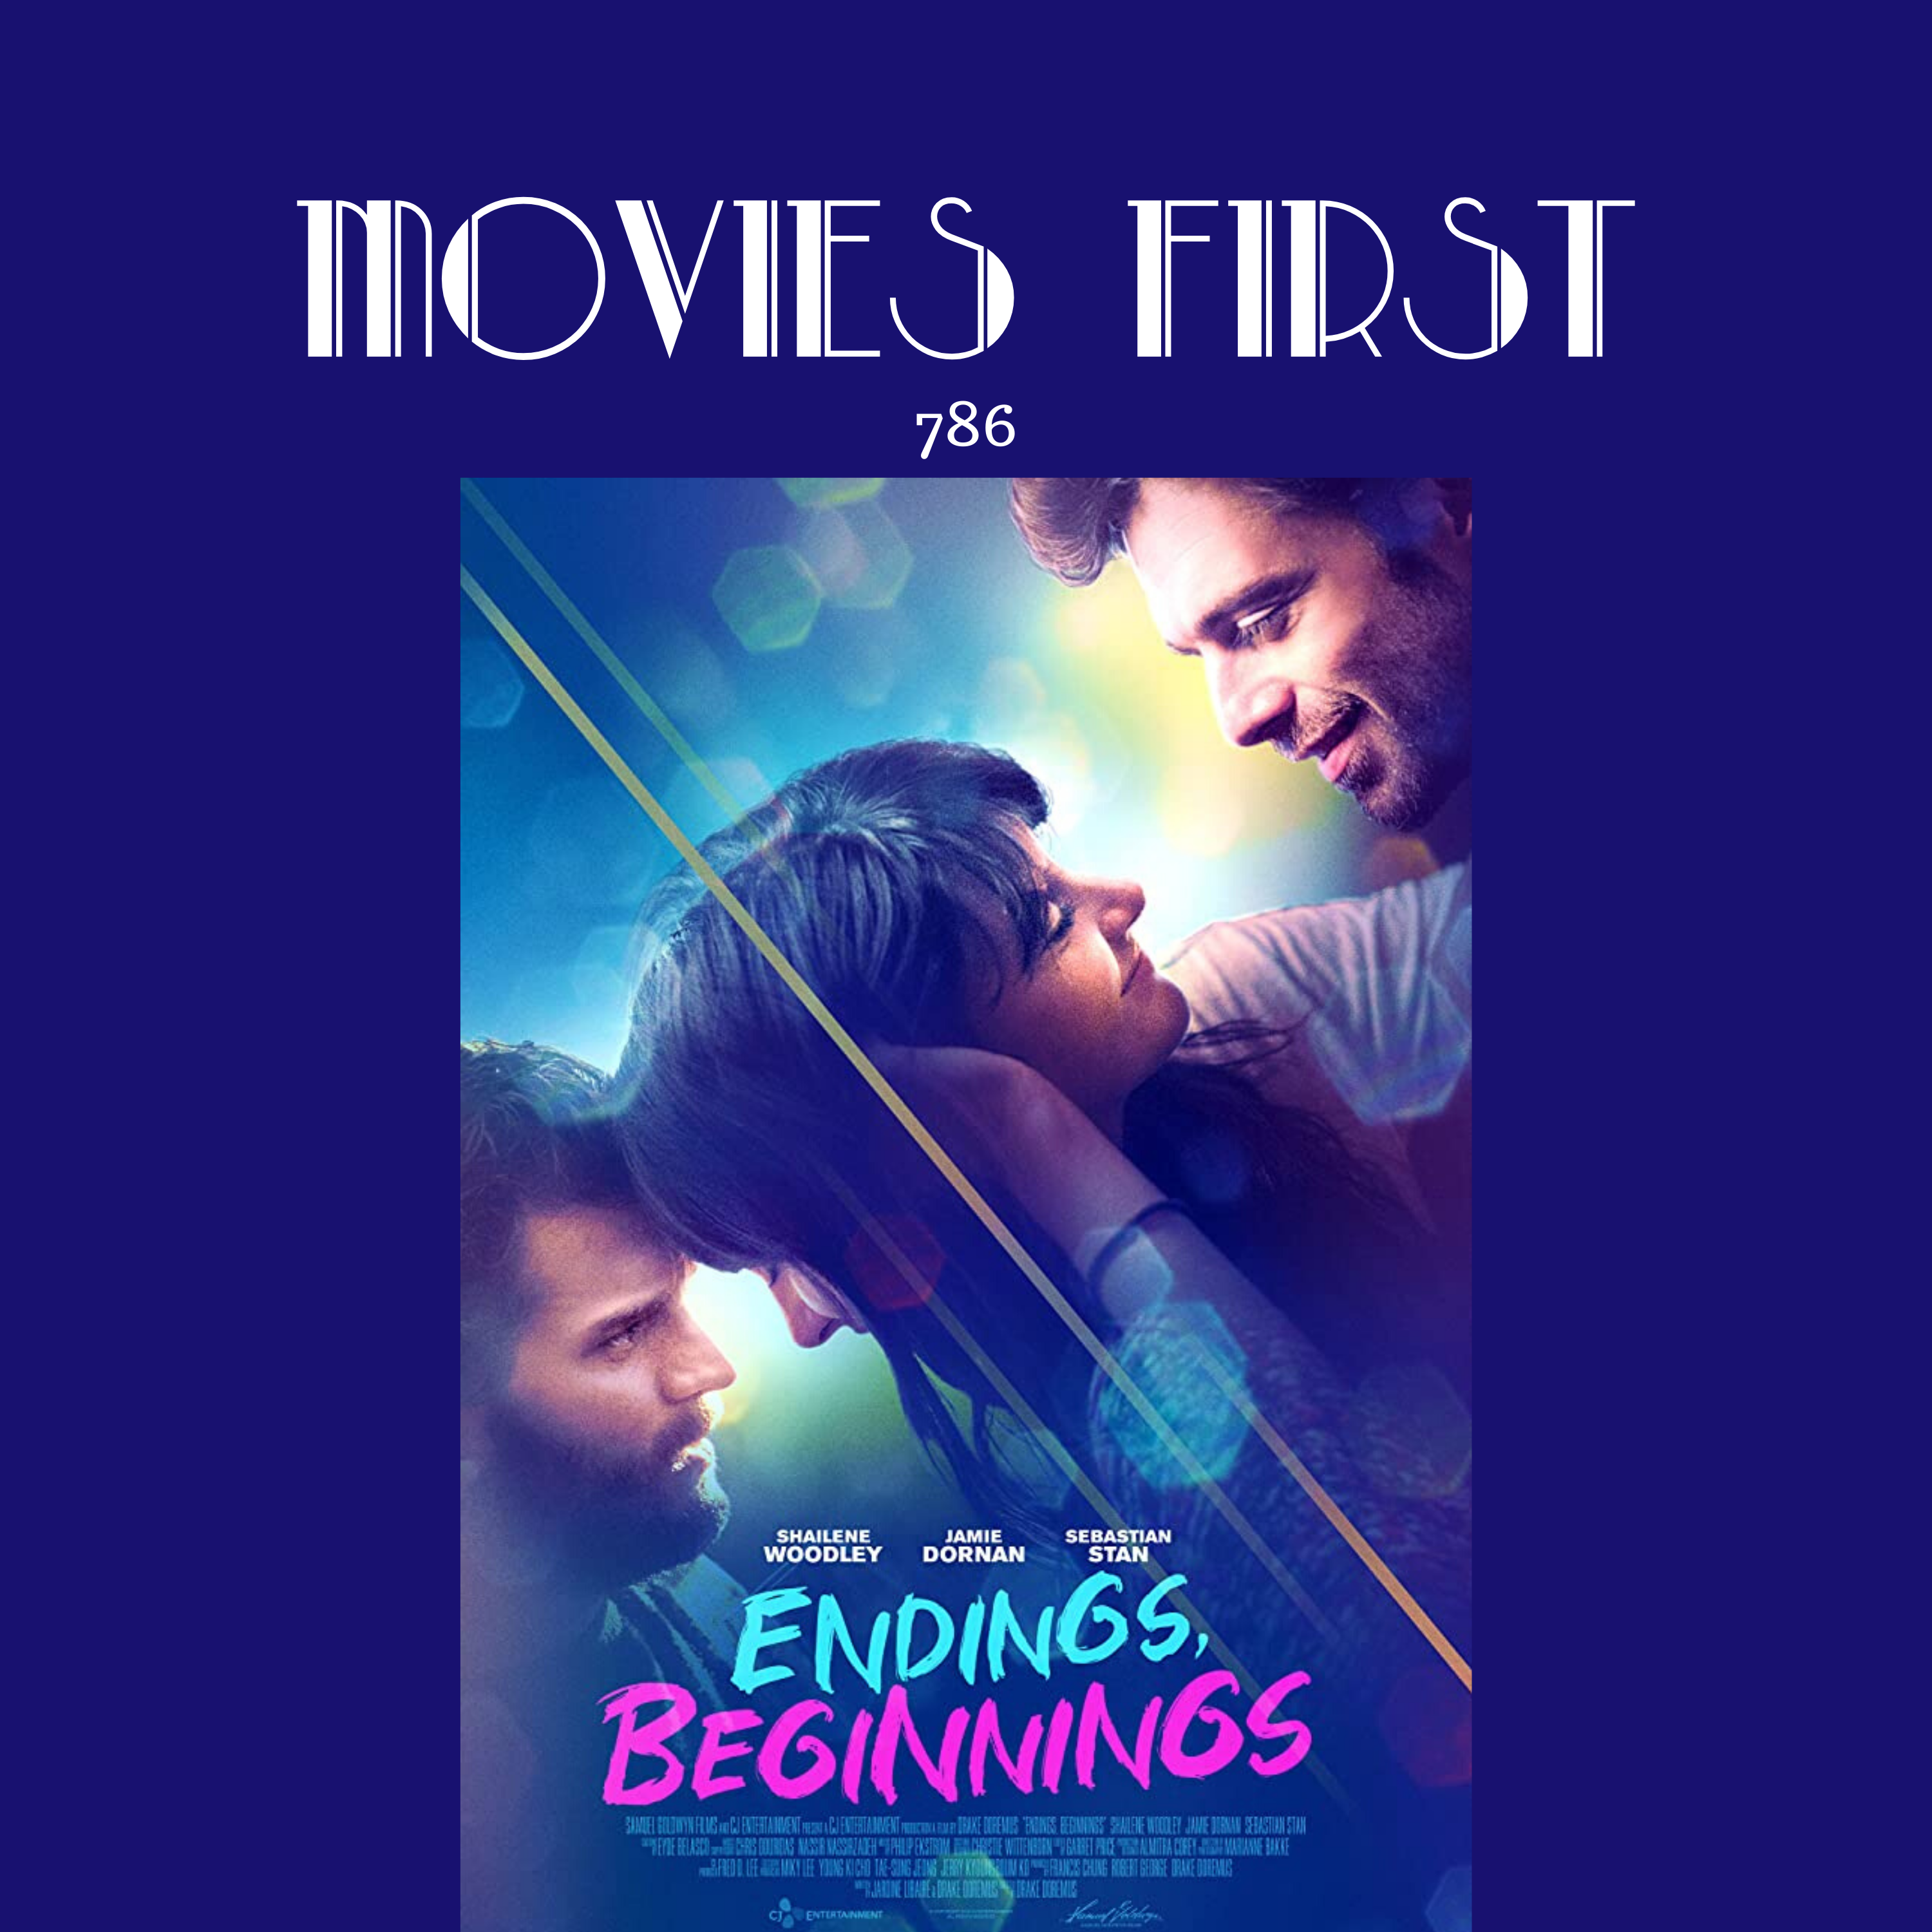 Endings, Beginnings (drama) (the @MoviesFirst review)